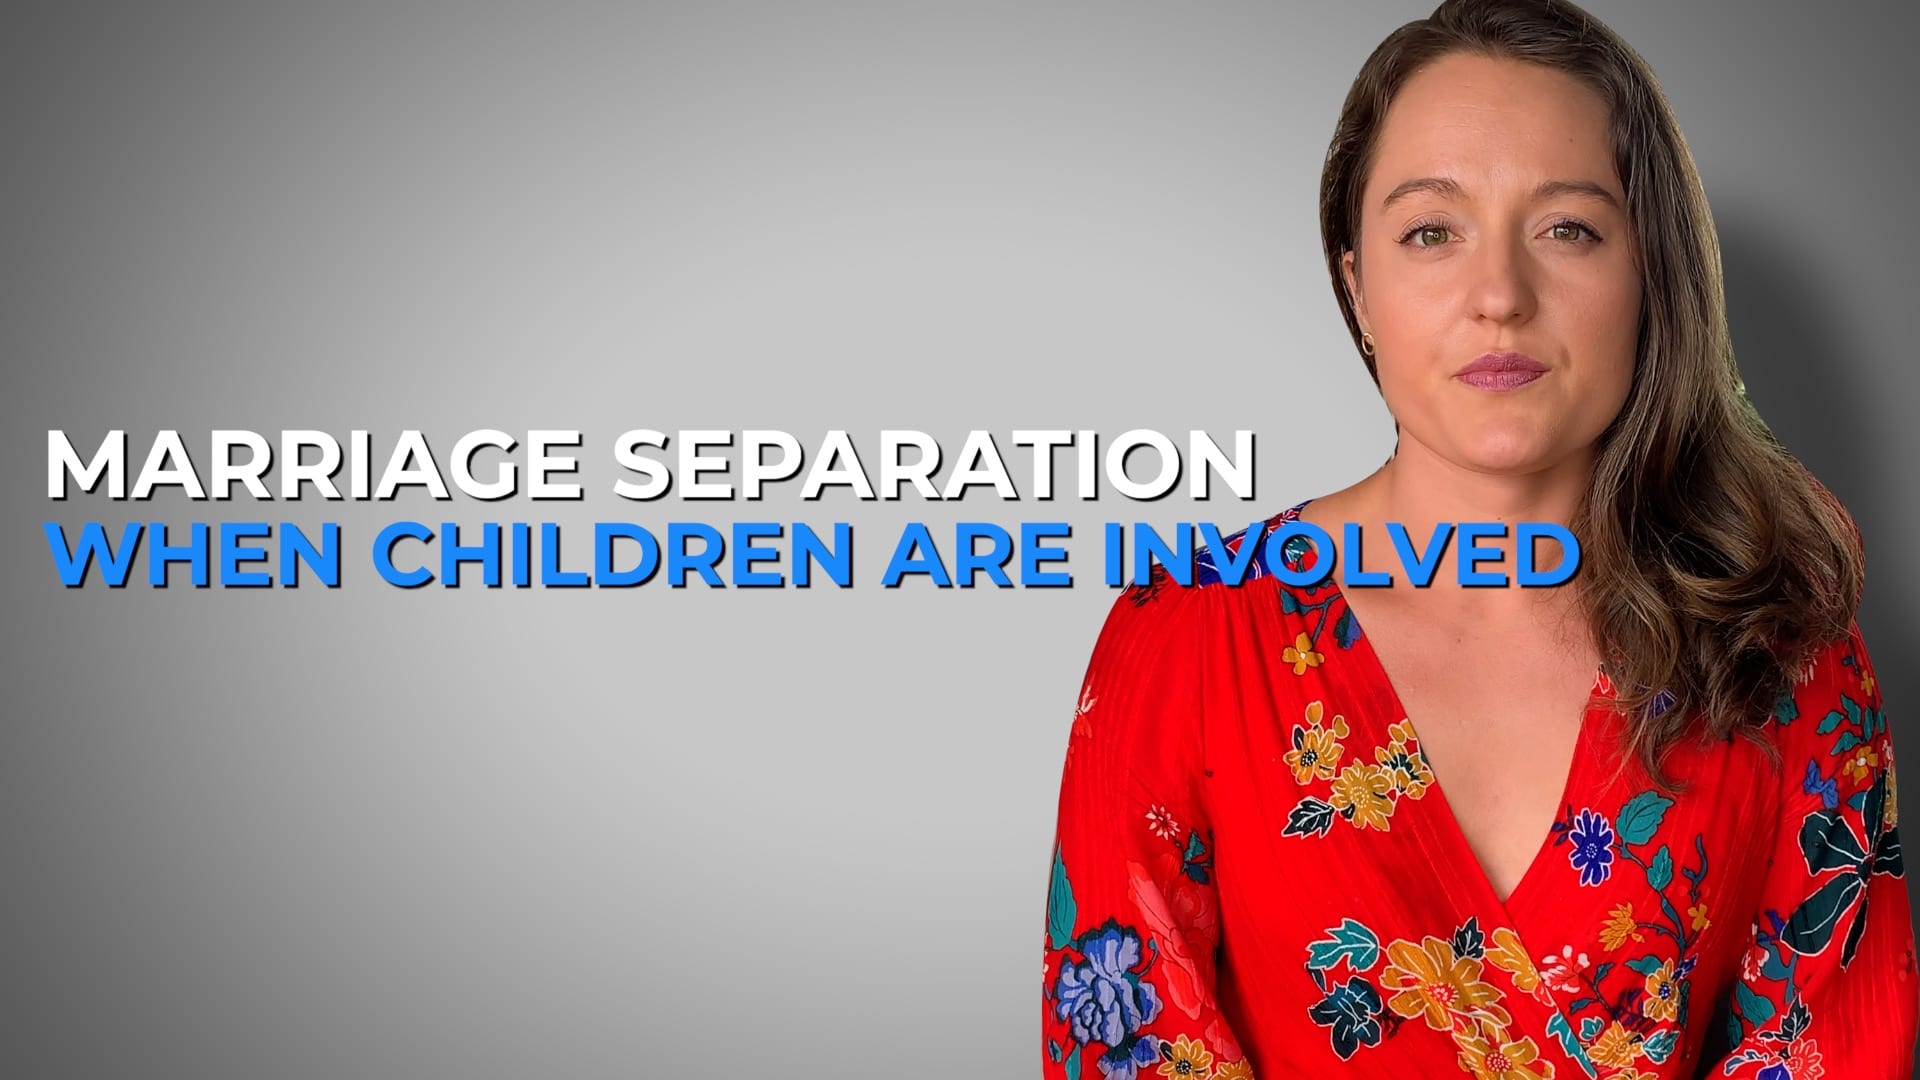 marriage separation, co-parenting, how divorce affects children, divorce when children are involved